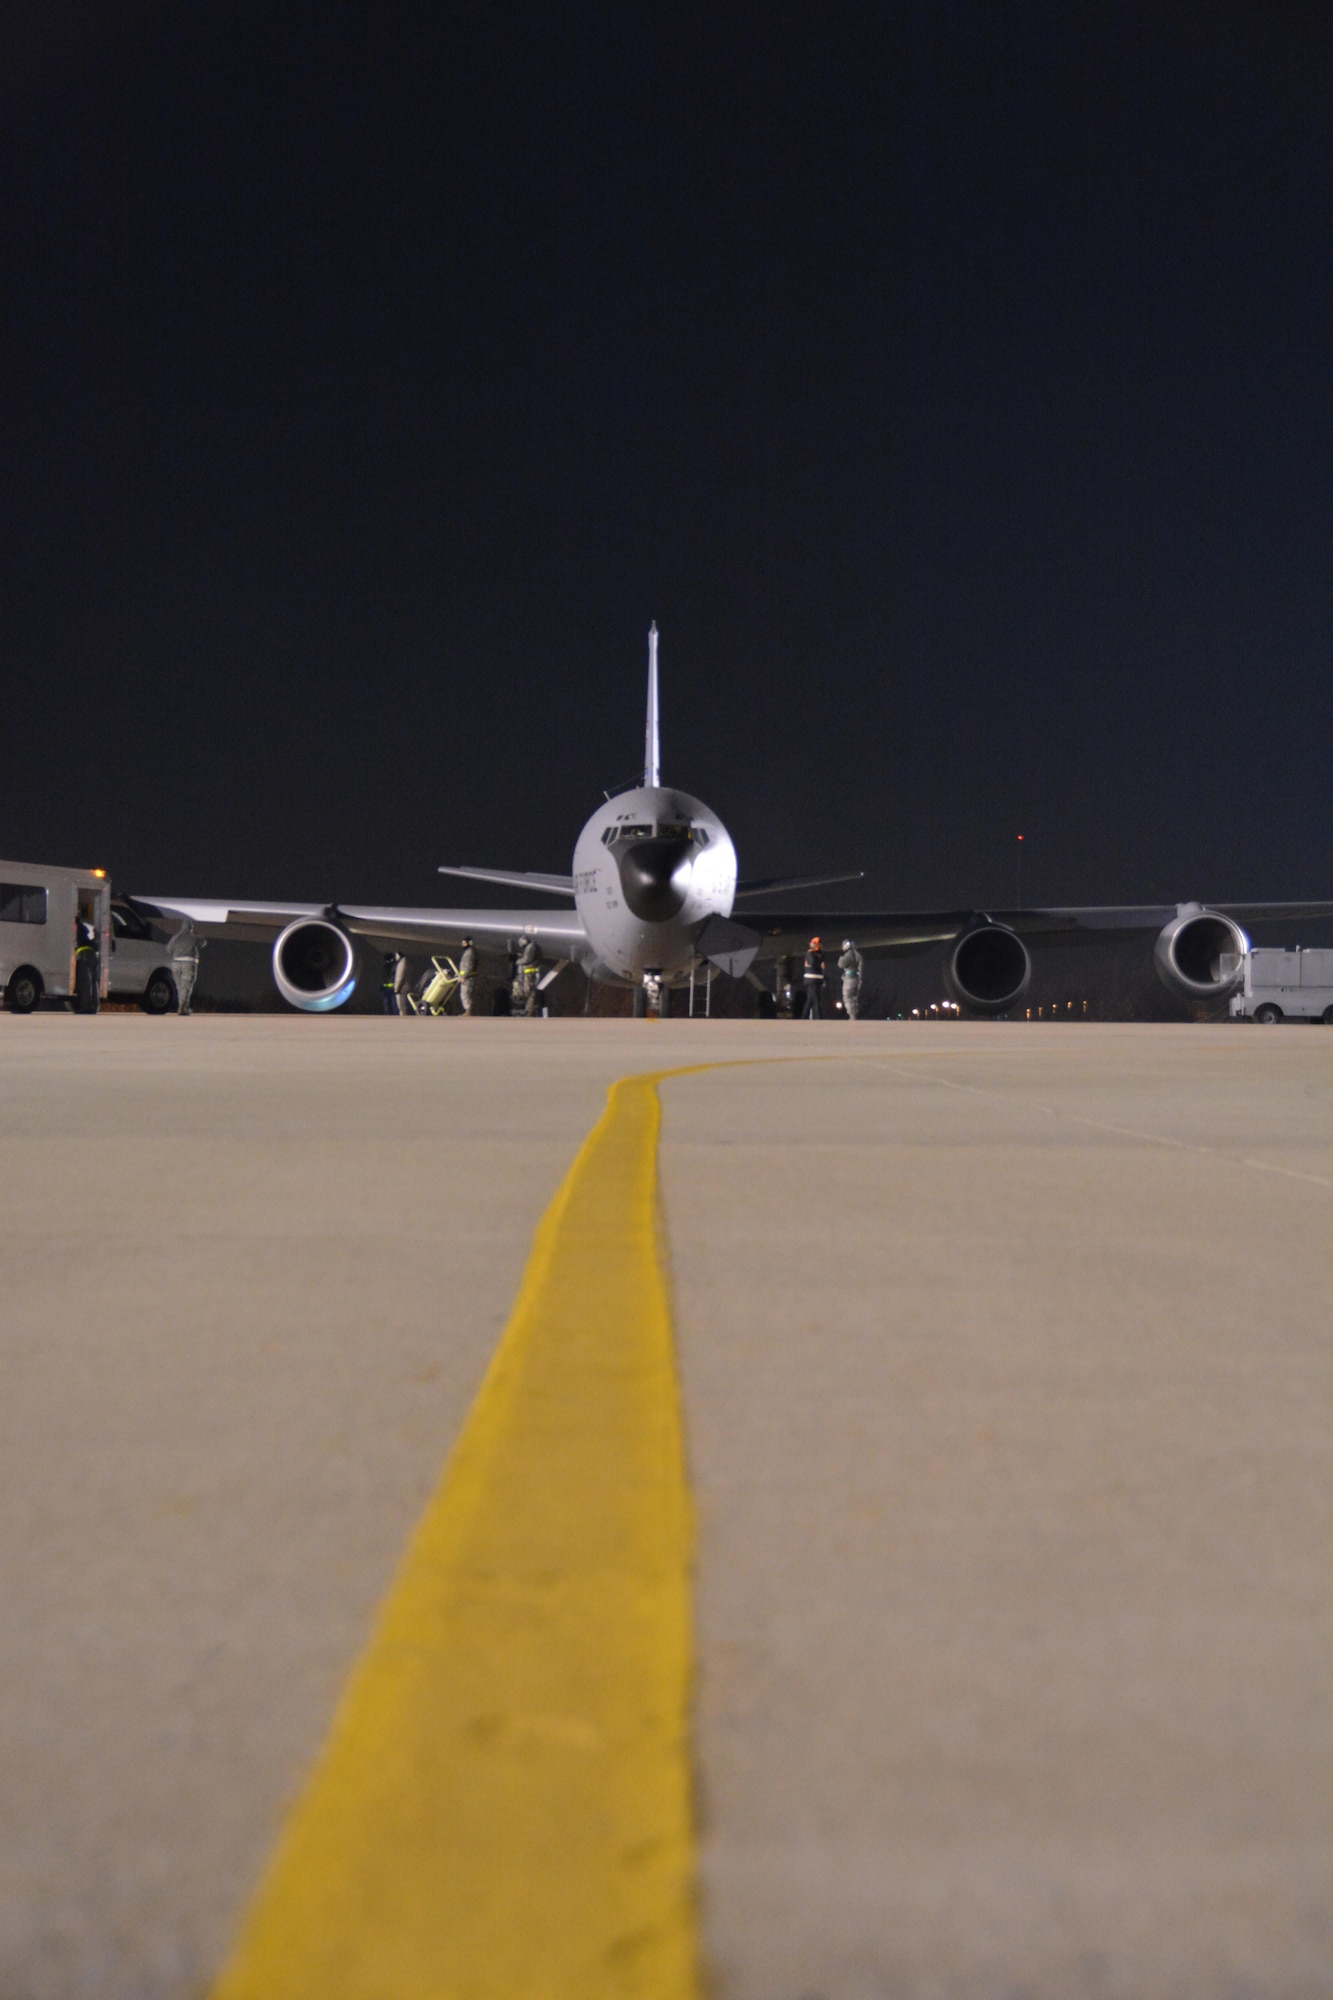 A 507th Air Refueling Wing KC-135R Stratotanker from Tinker Air Force Base, Oklahoma starts its engines as it prepares to take some of the 94 Citizen Airman and cargo to Turkey to support on-going air refueling operations in Southwest Asia here December 13, 2016. (U.S. Air Force Photo/Maj. Jon Quinlan)